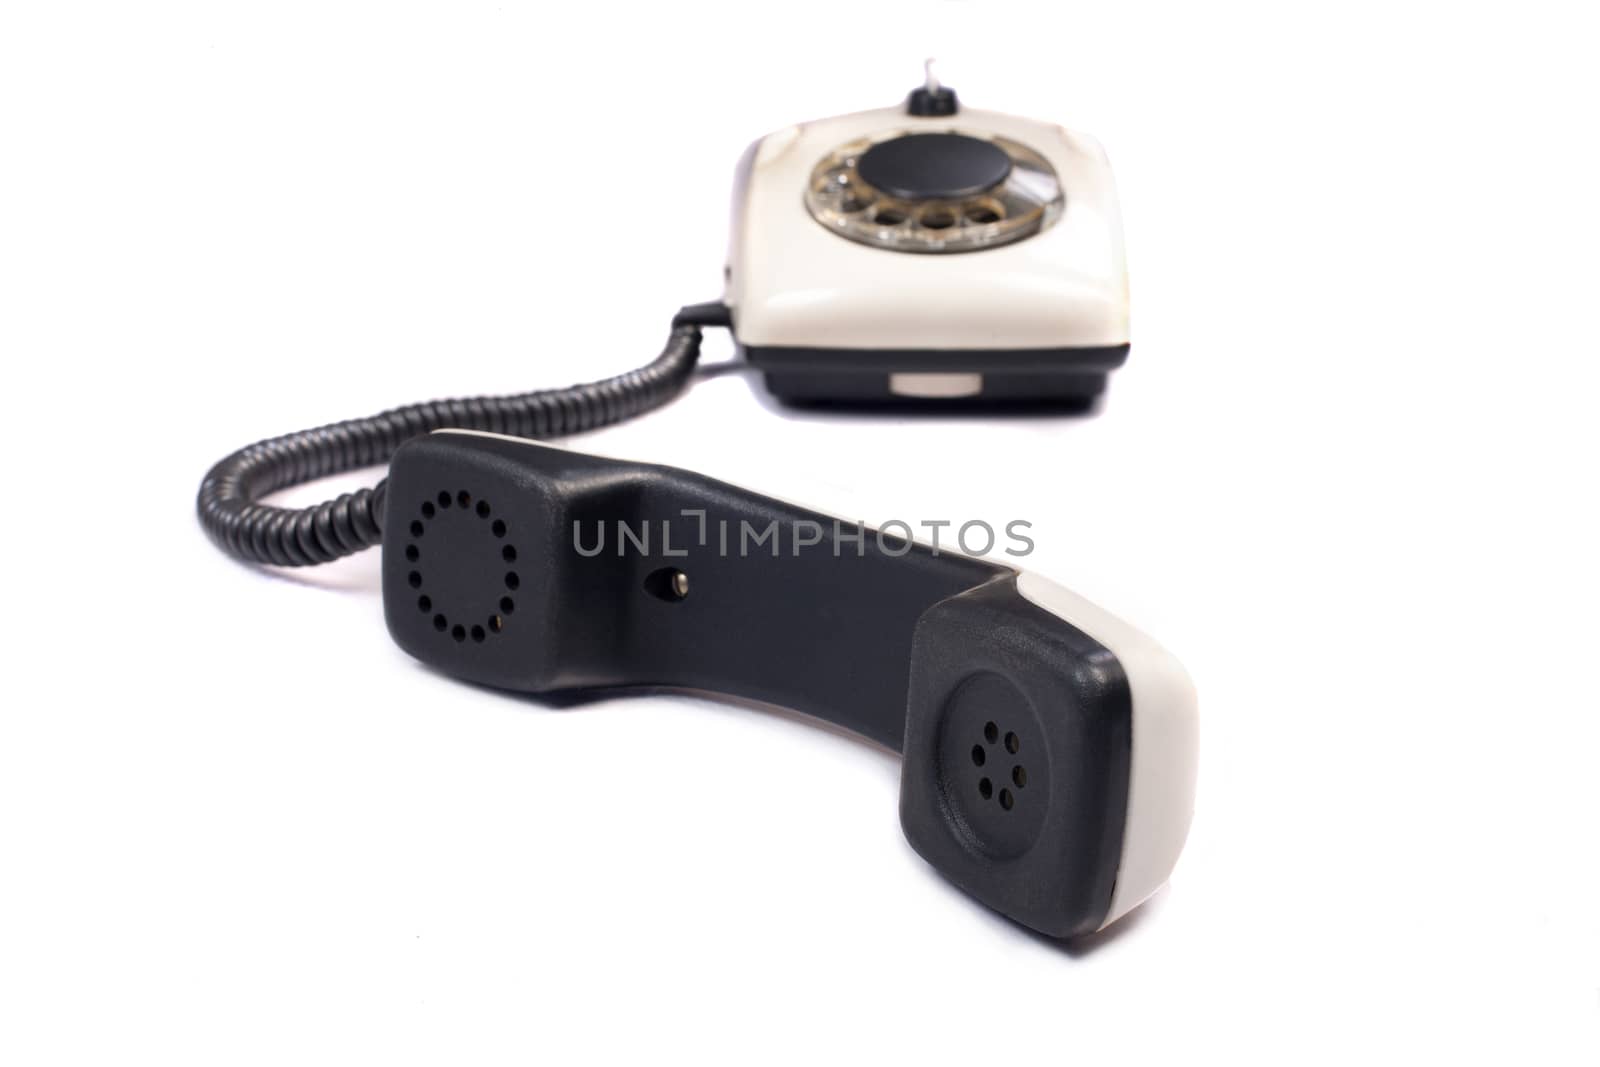 Old disk phone on white background